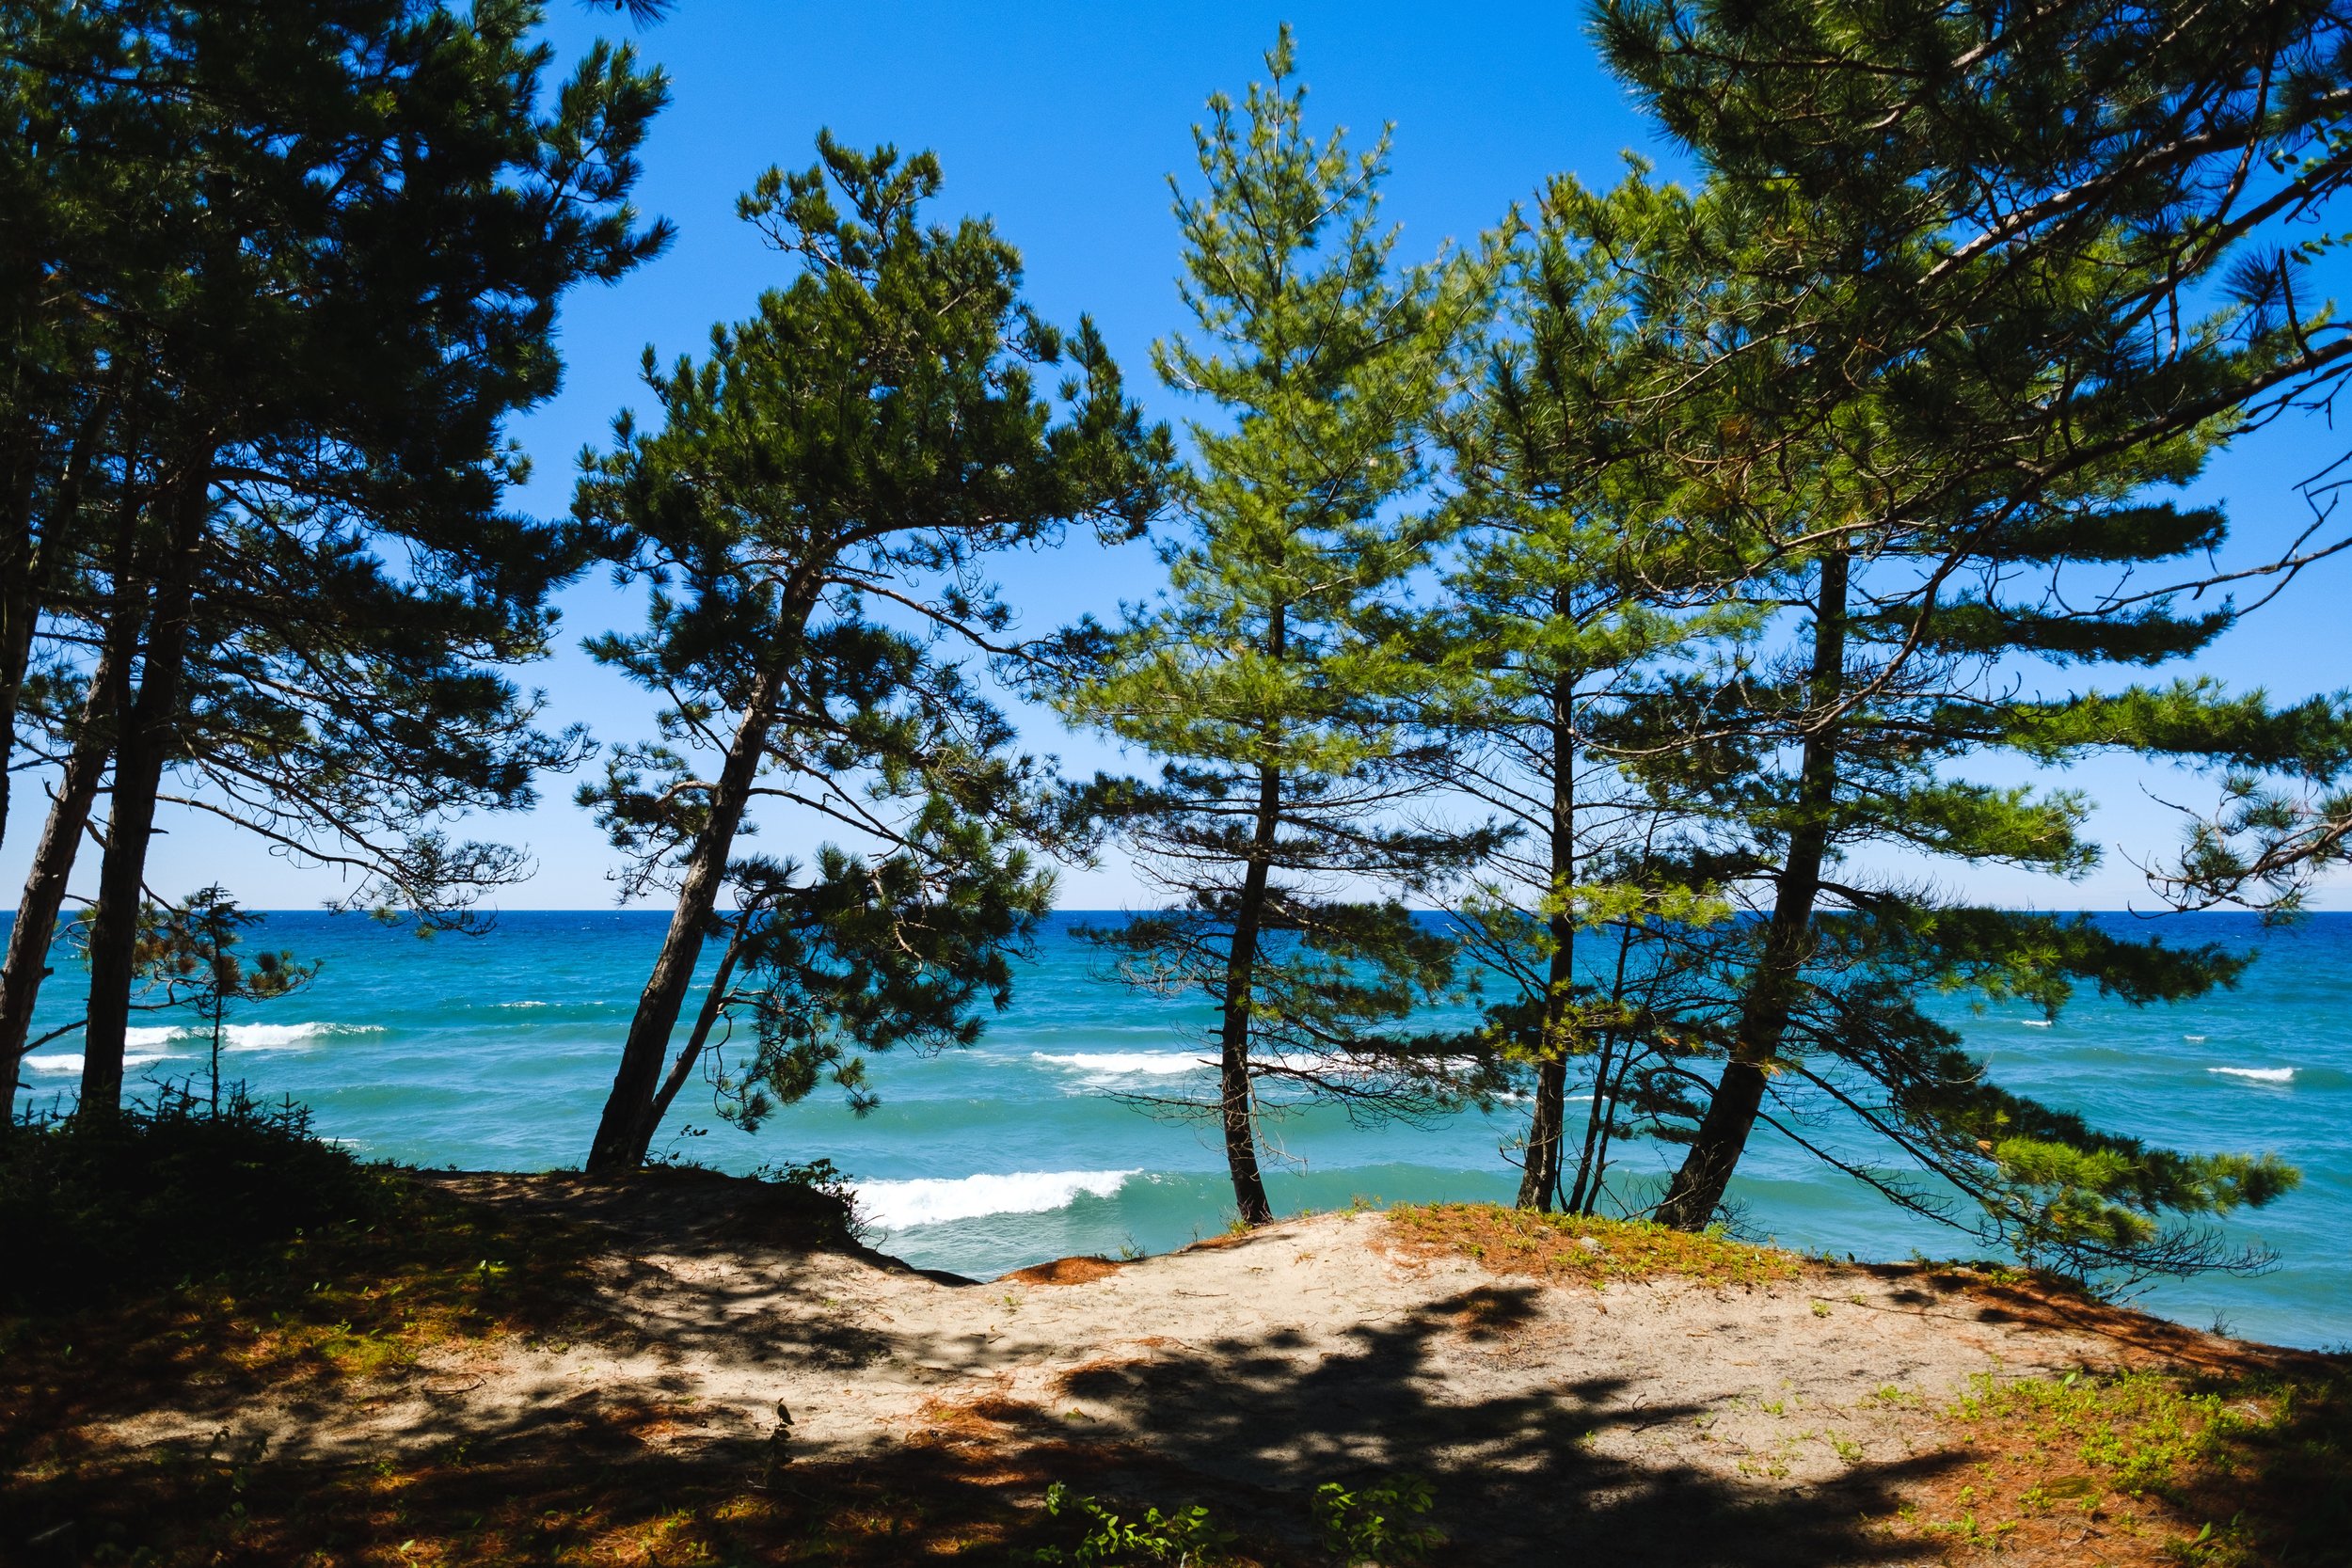  The view from our campsite in Pictured Rocks National Lakeshore on Lake Superior. 